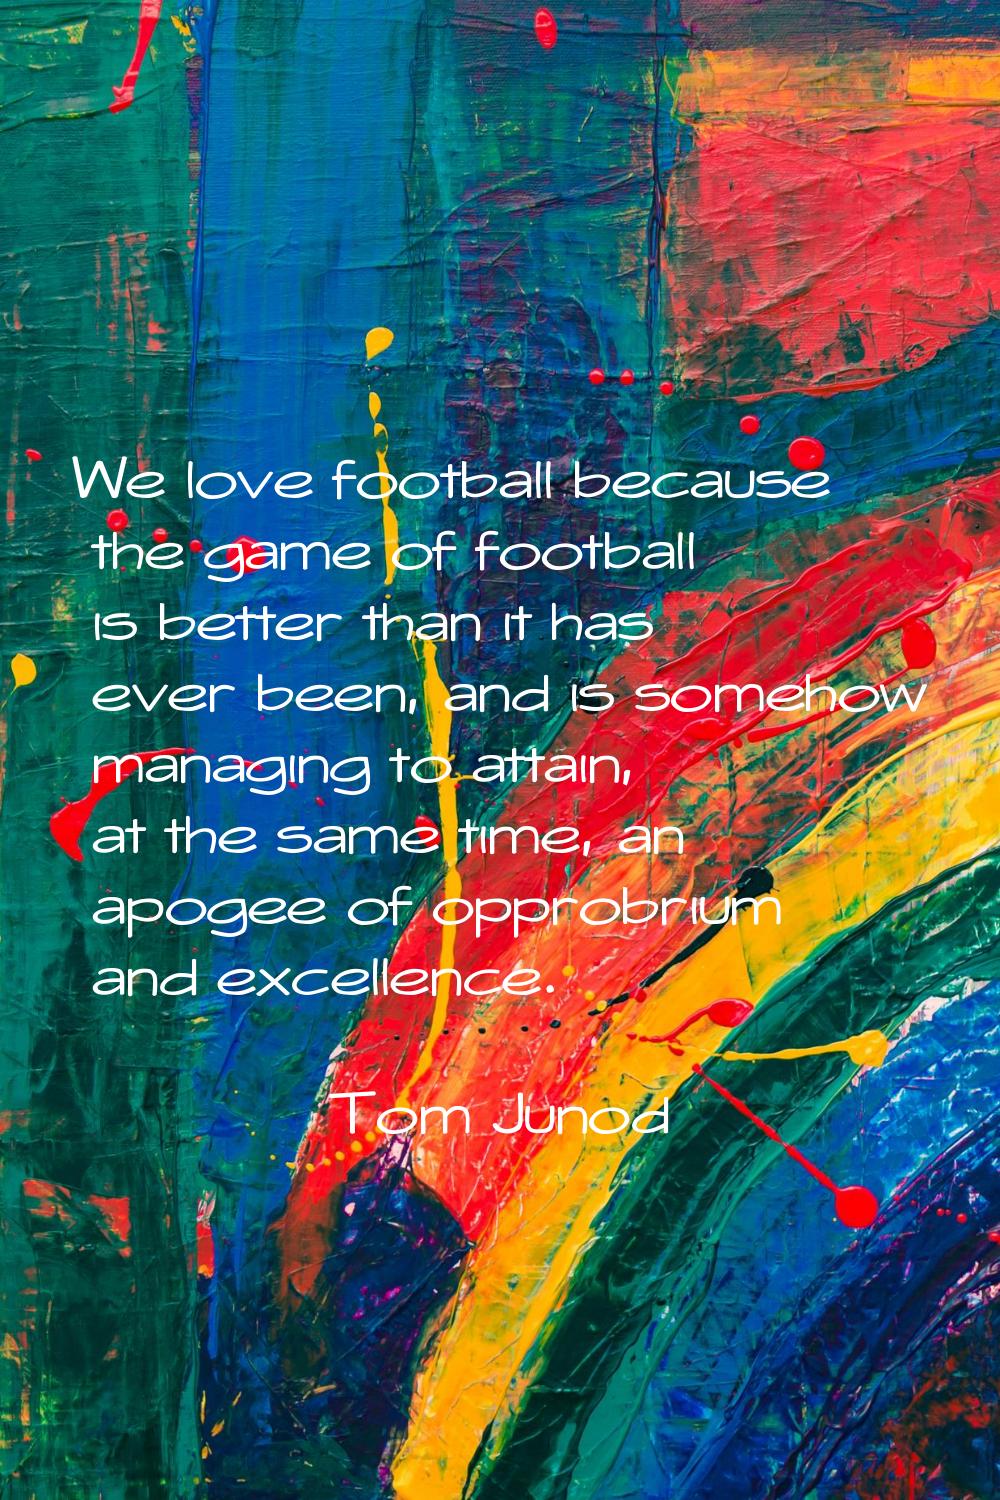 We love football because the game of football is better than it has ever been, and is somehow manag